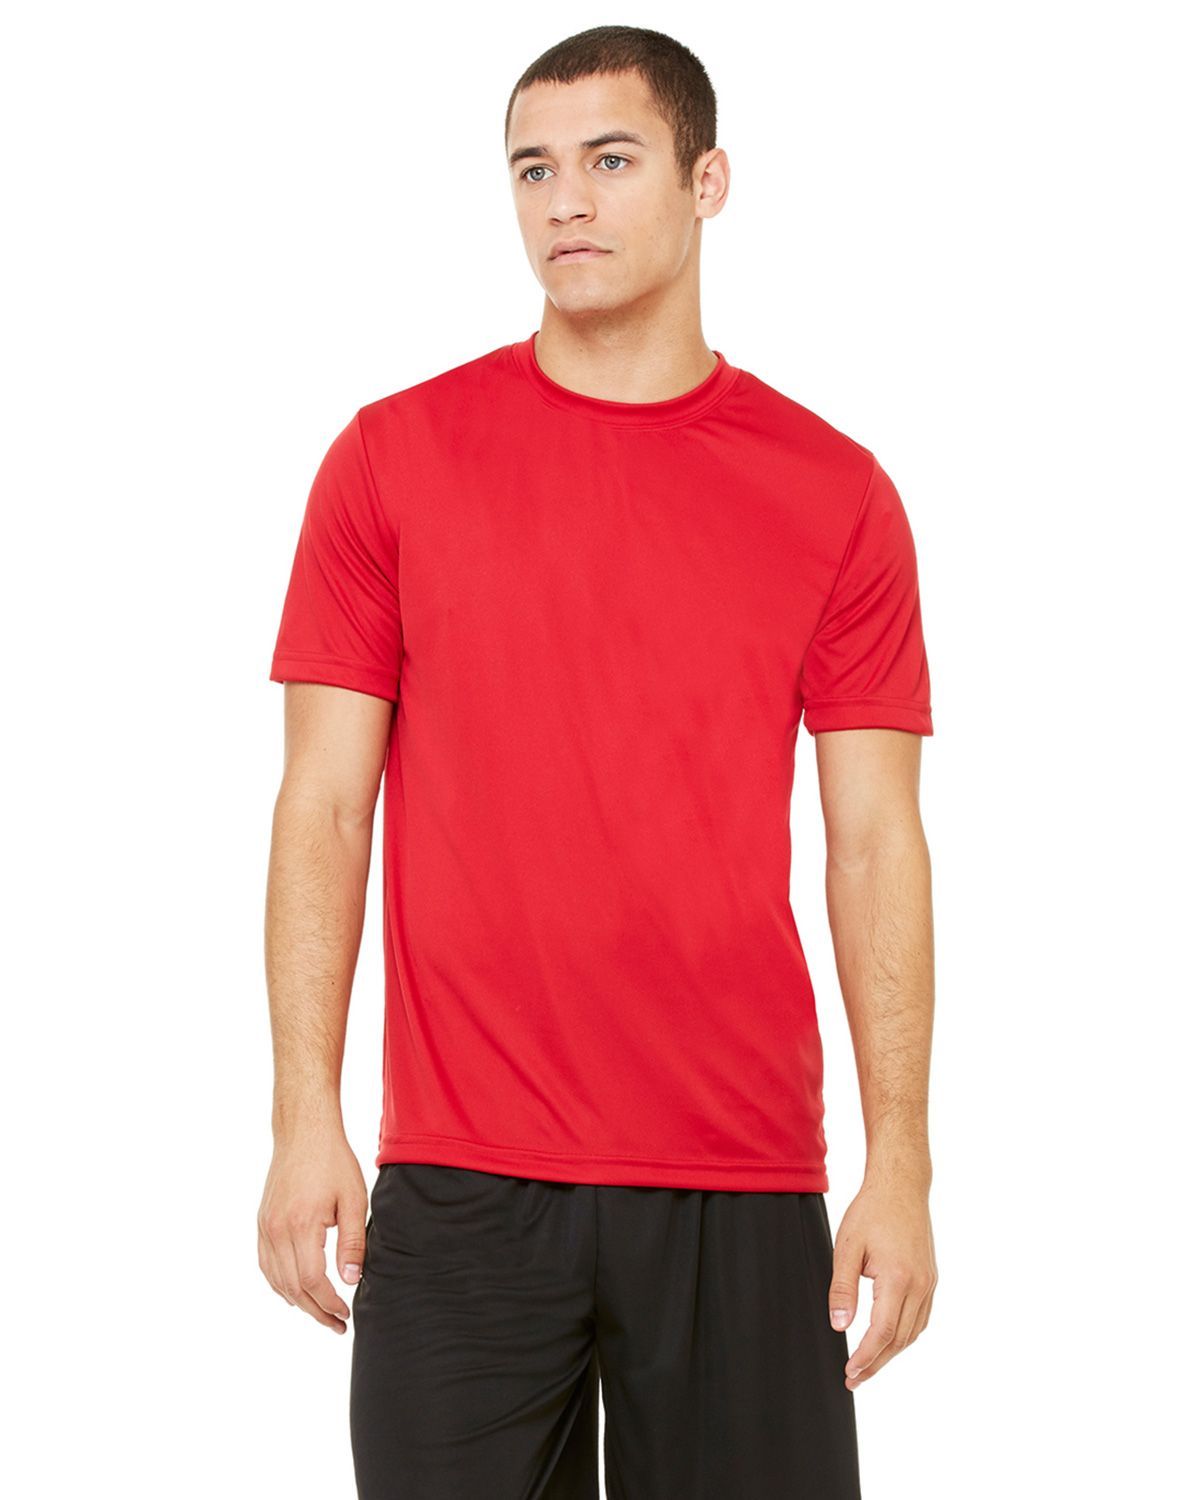 red sports shirt